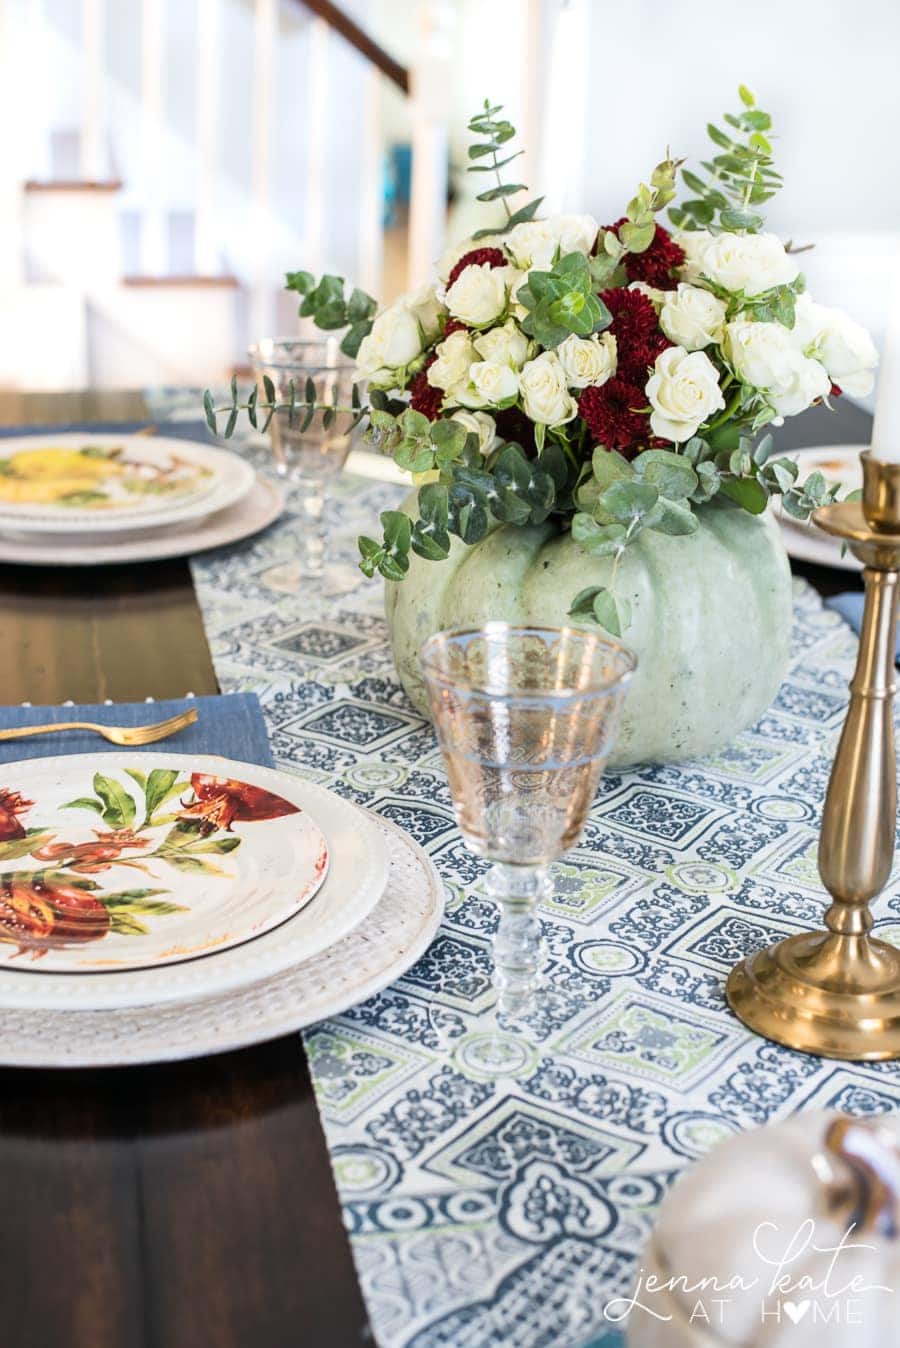 A close-up of the blue and white table runner, golden candlestick, blue and gold patterned stemware and fall-themed plates